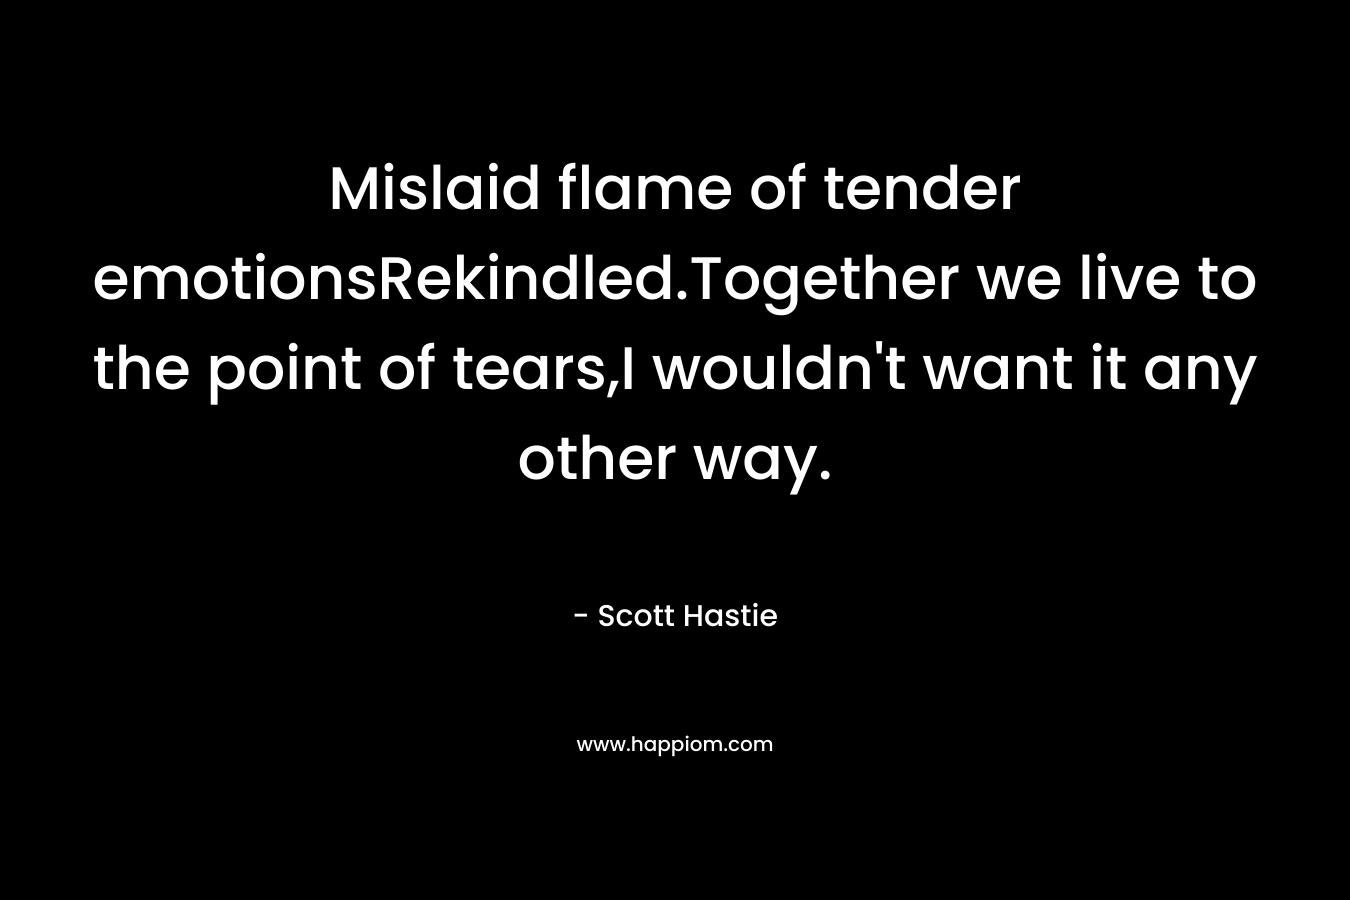 Mislaid flame of tender emotionsRekindled.Together we live to the point of tears,I wouldn't want it any other way.